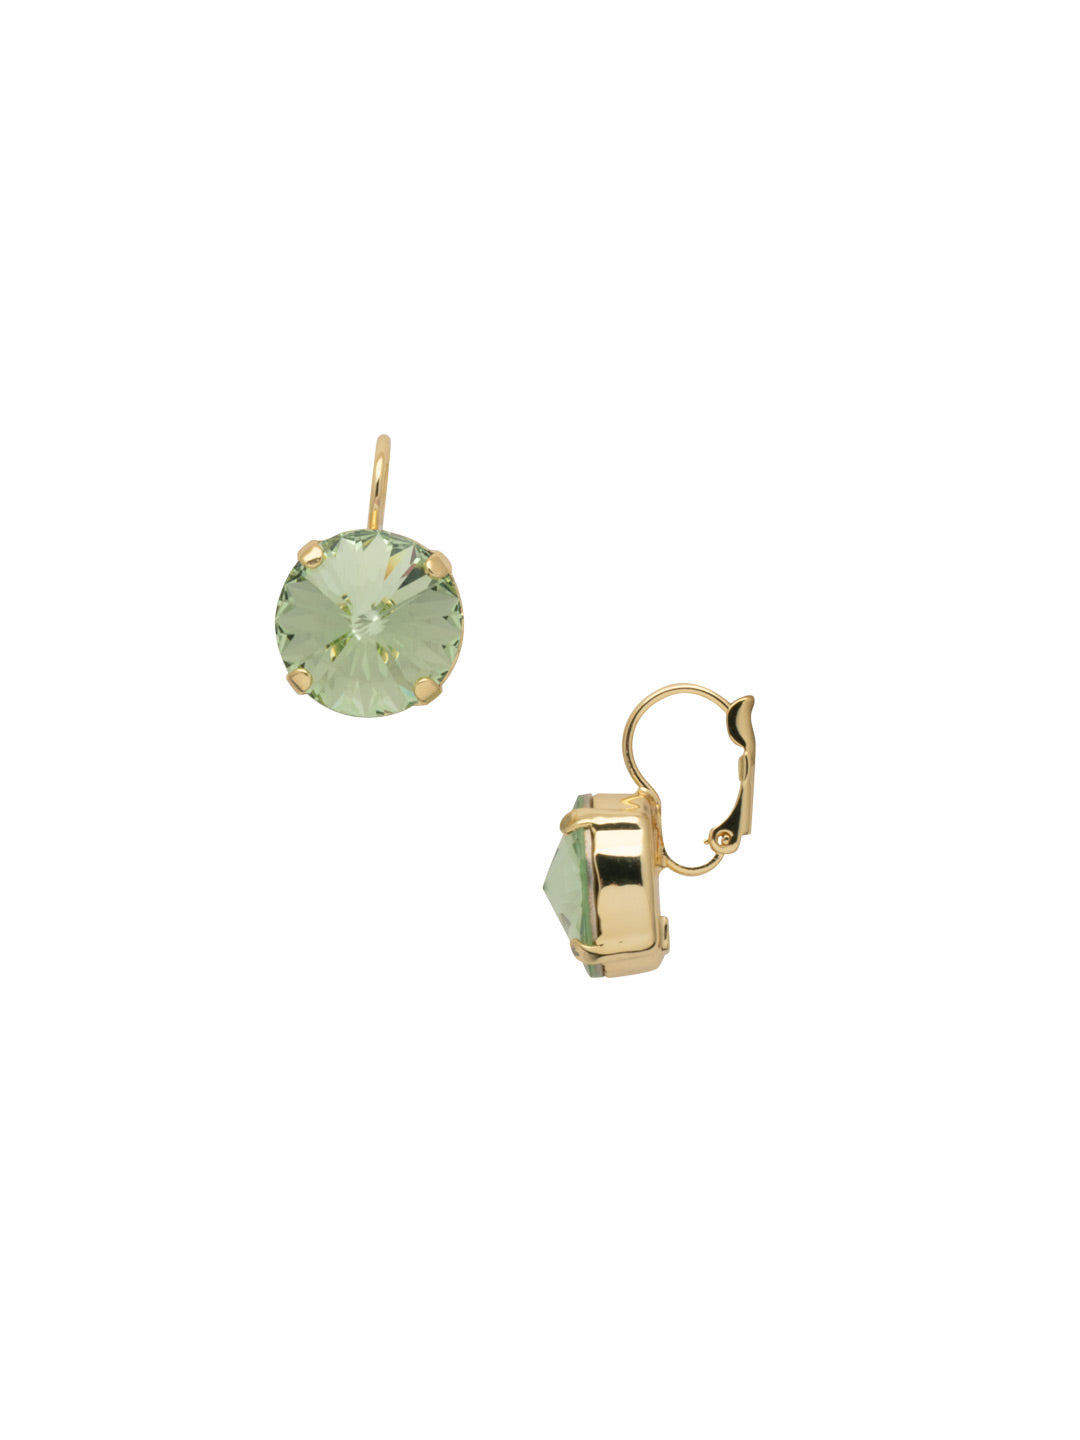 Radiant Round Dangle Earring - EDH108BGSGR - <p>Shine on! This bright, petite earring offers sparkle for days and integrated seamlessly into any look.. From Sorrelli's Sage Green collection in our Bright Gold-tone finish.</p>